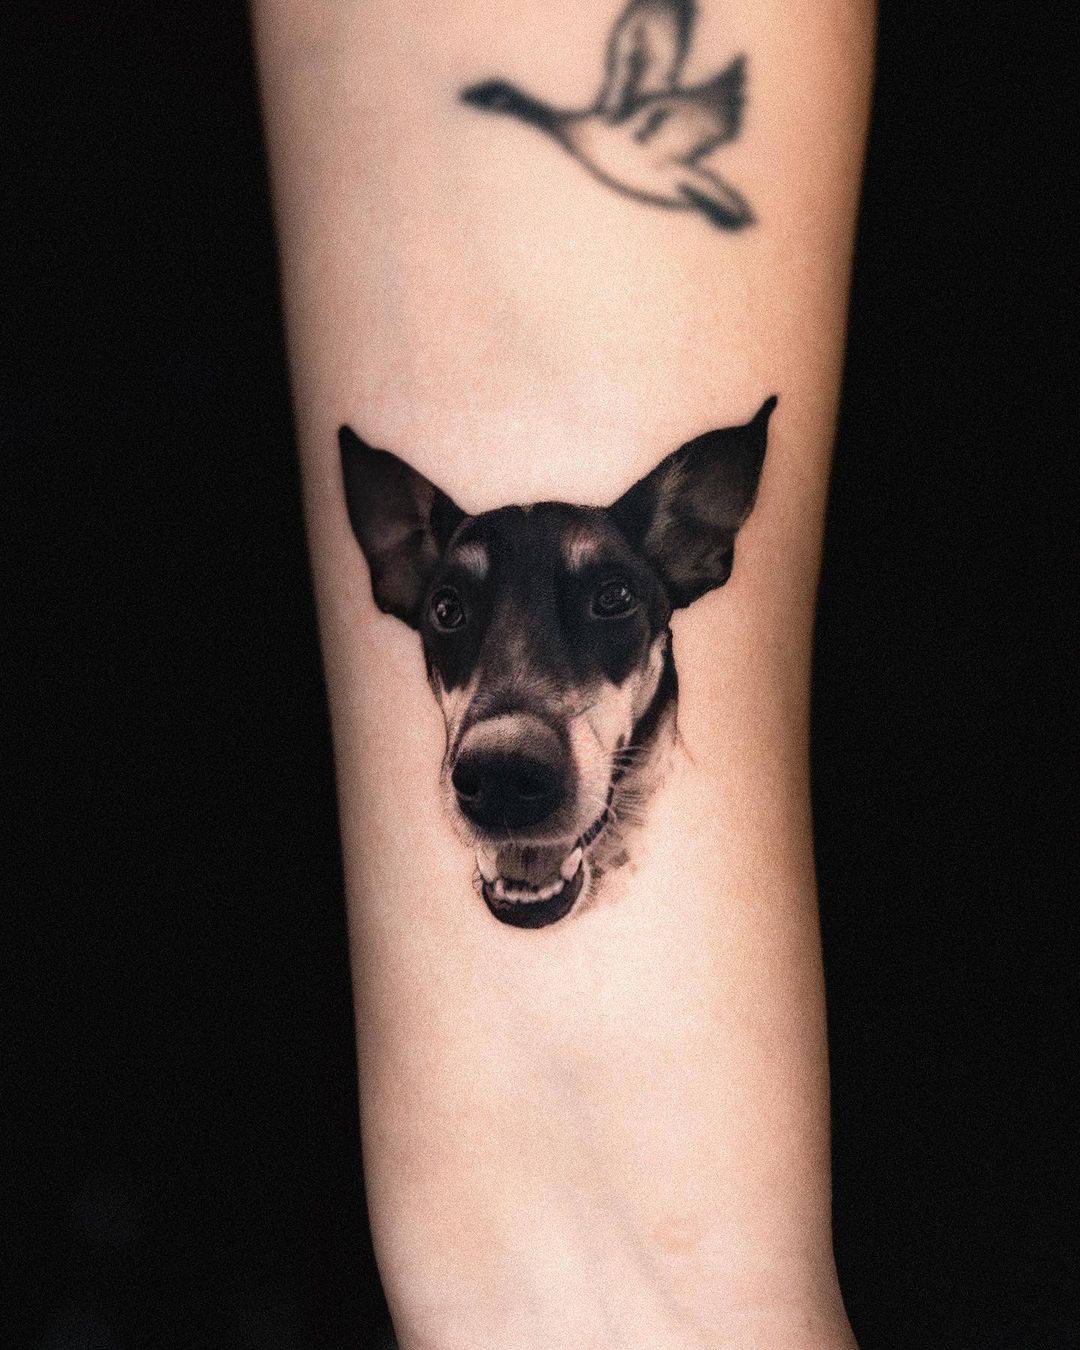 Amazing Realistic dog portrait tattoo on arm by blindreasontattoo